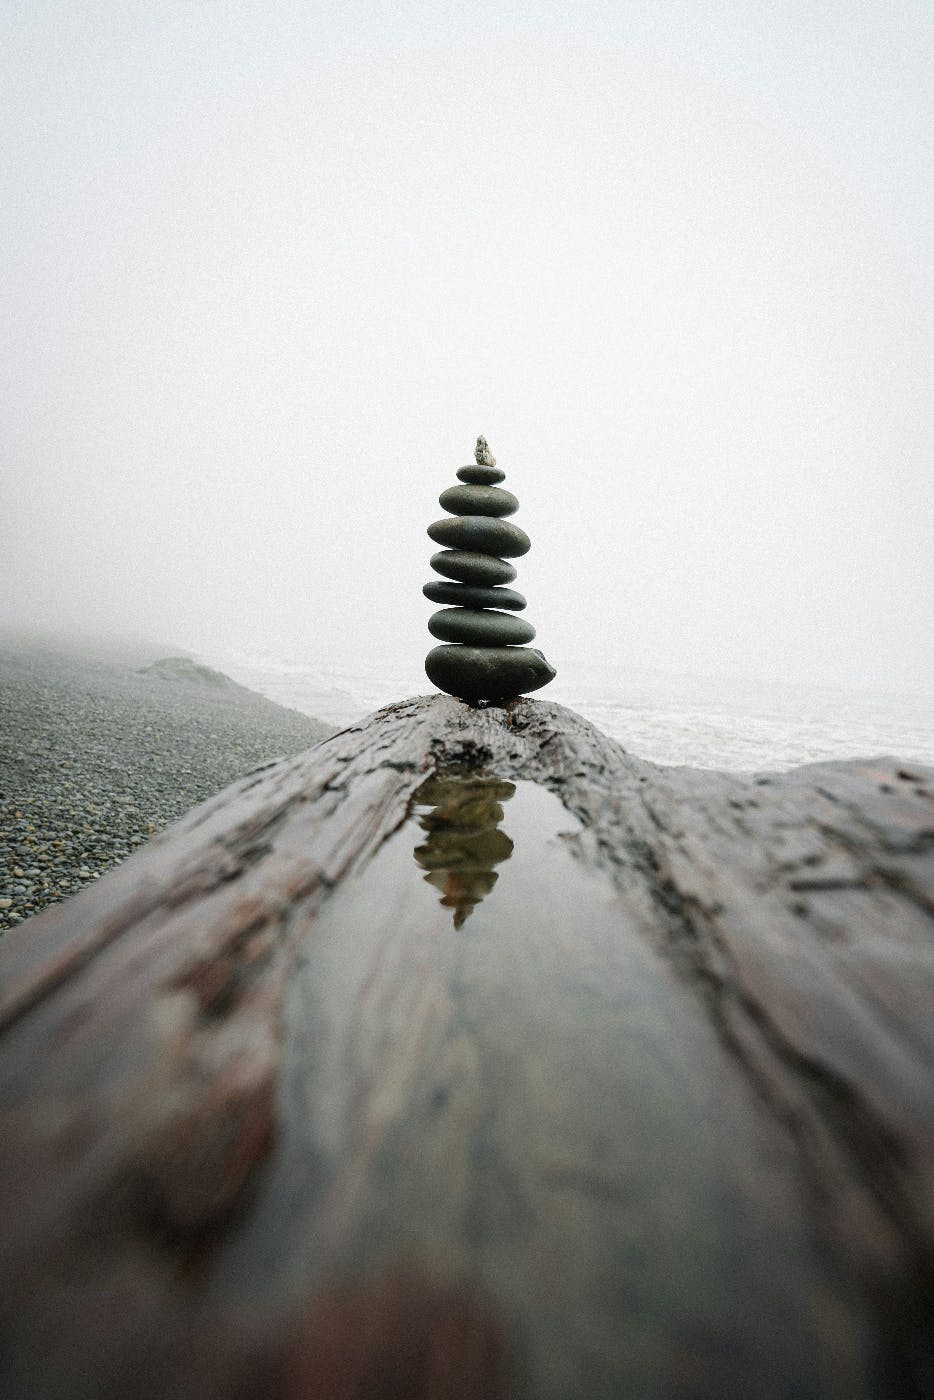 8 stones balanced on each other on a log by the sea, their reflection seen in a puddle on the log